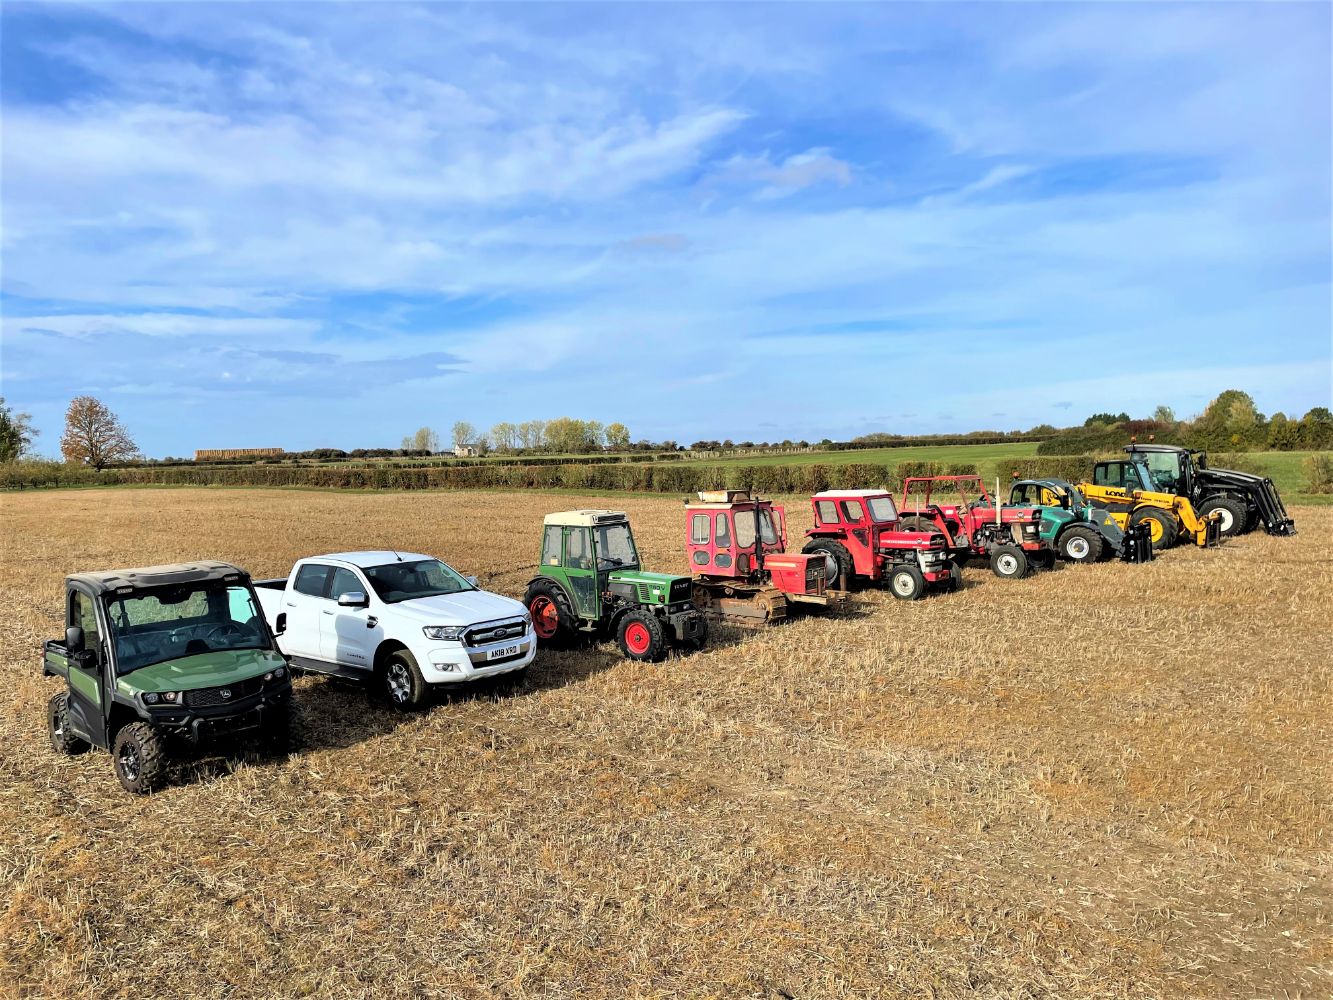 Sale by Auction of Modern, Vintage and Vineyard Farm Machinery and Equipment